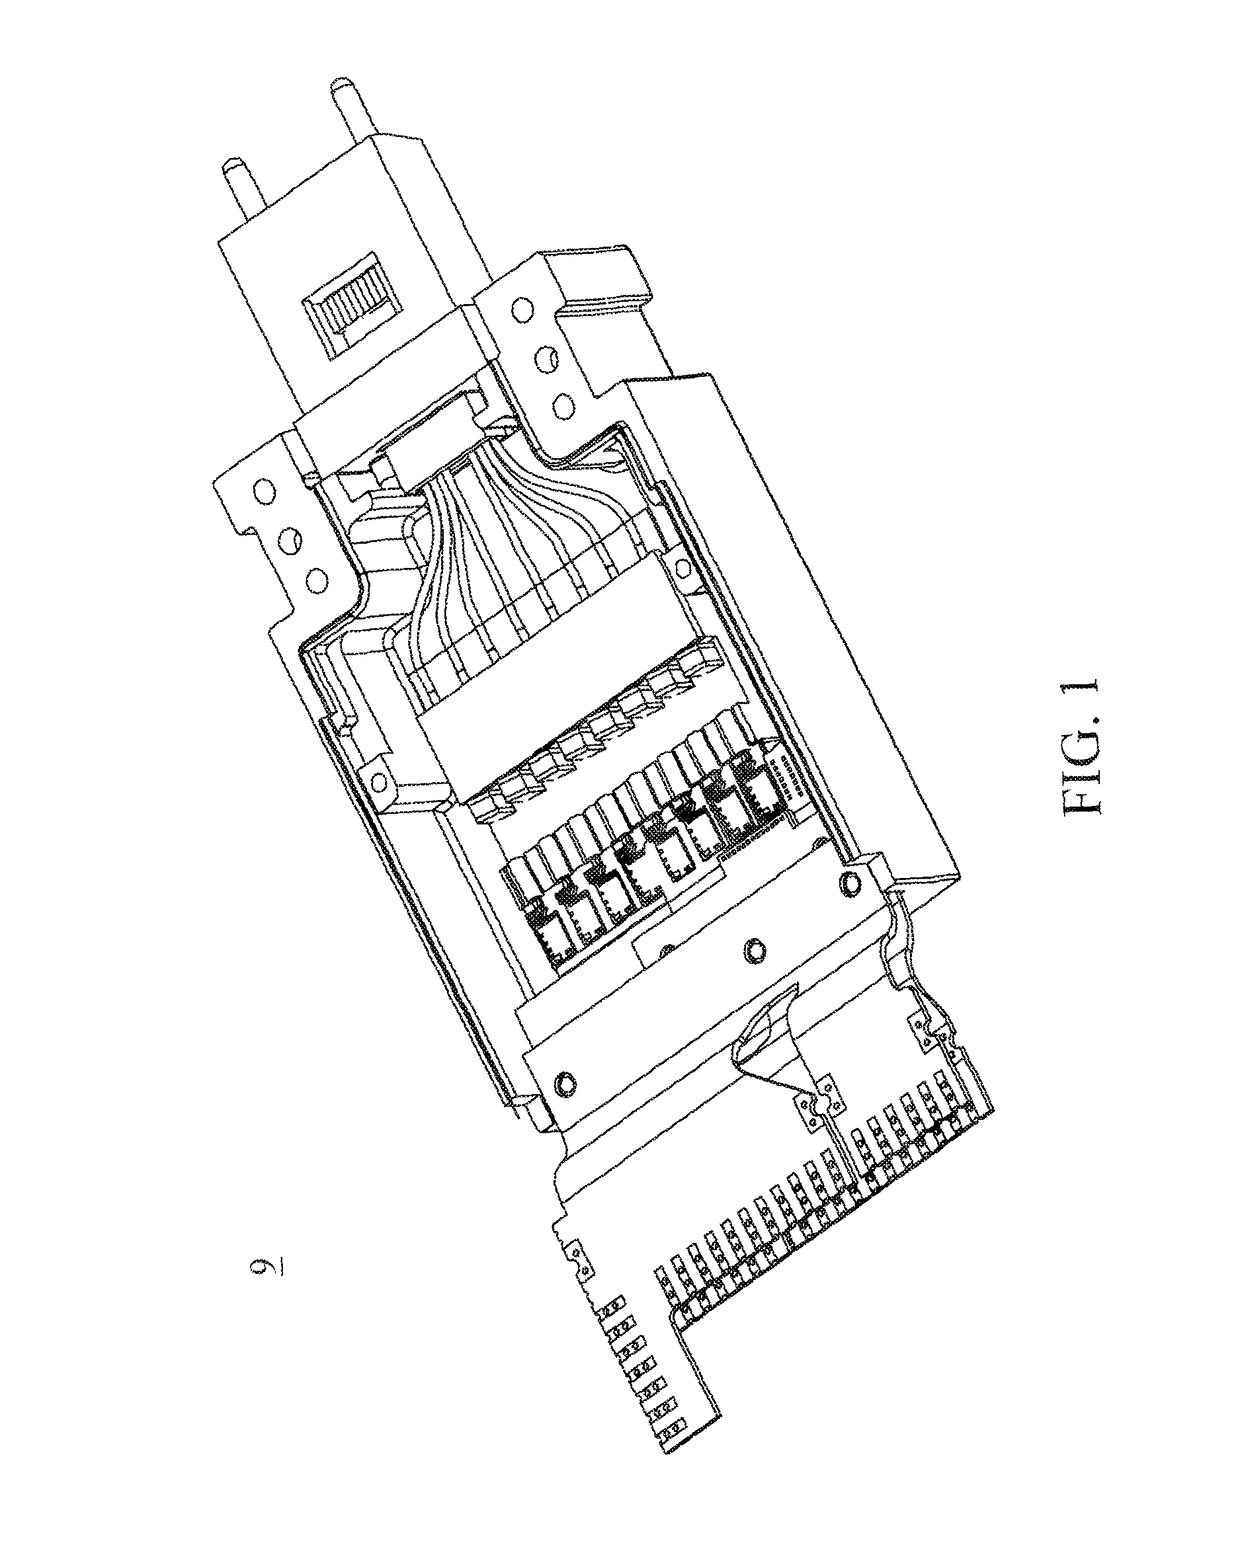 Multi-channel laser device with fiber array